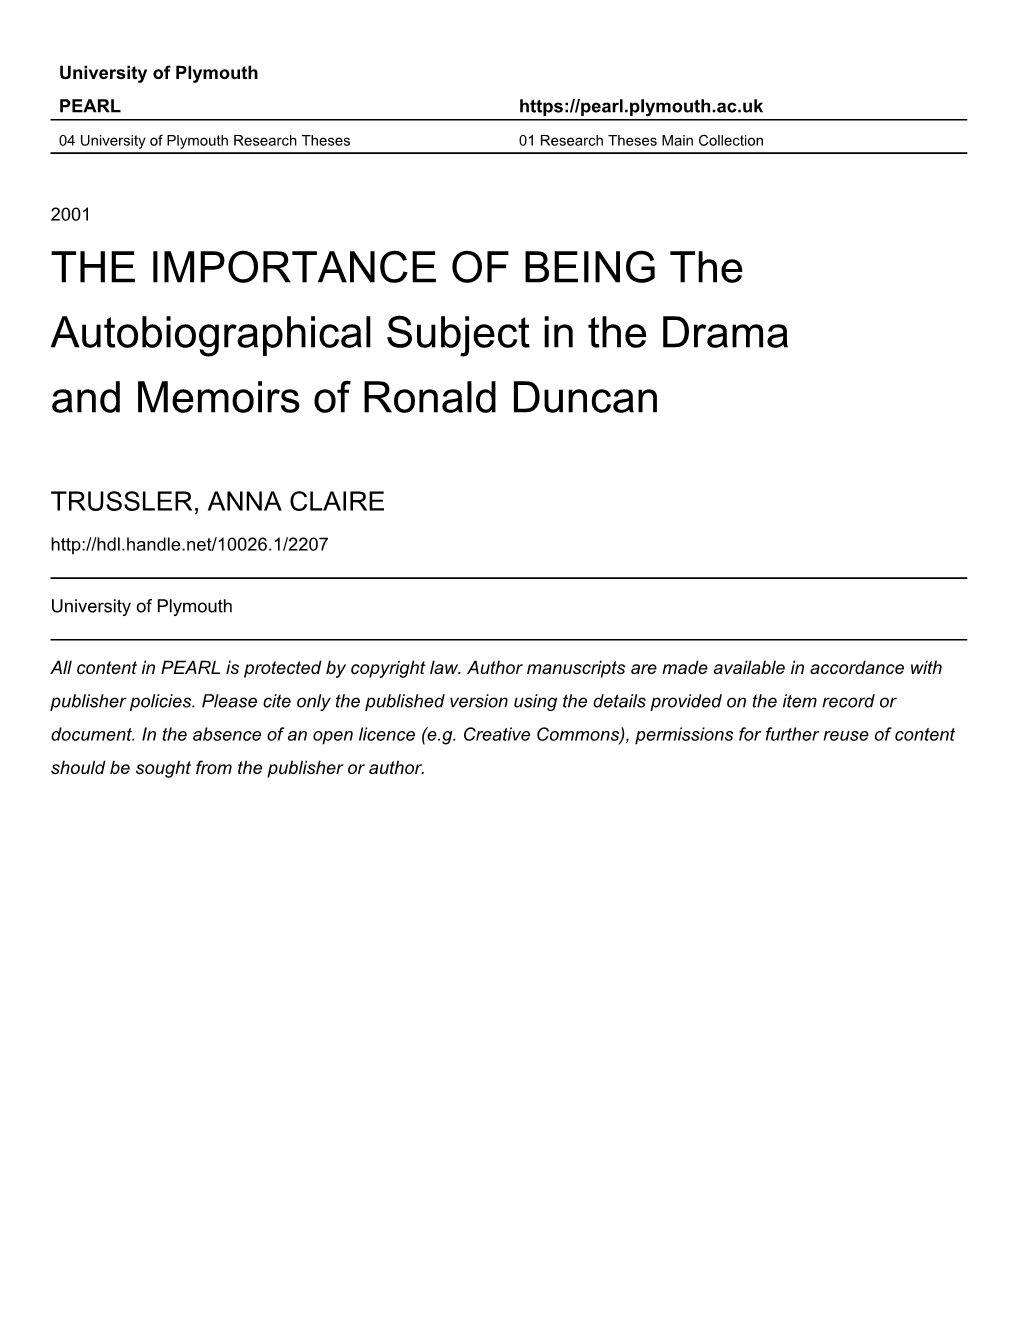 THE IMPORTANCE of BEING the Autobiographical Subject in the Drama and Memoirs of Ronald Duncan